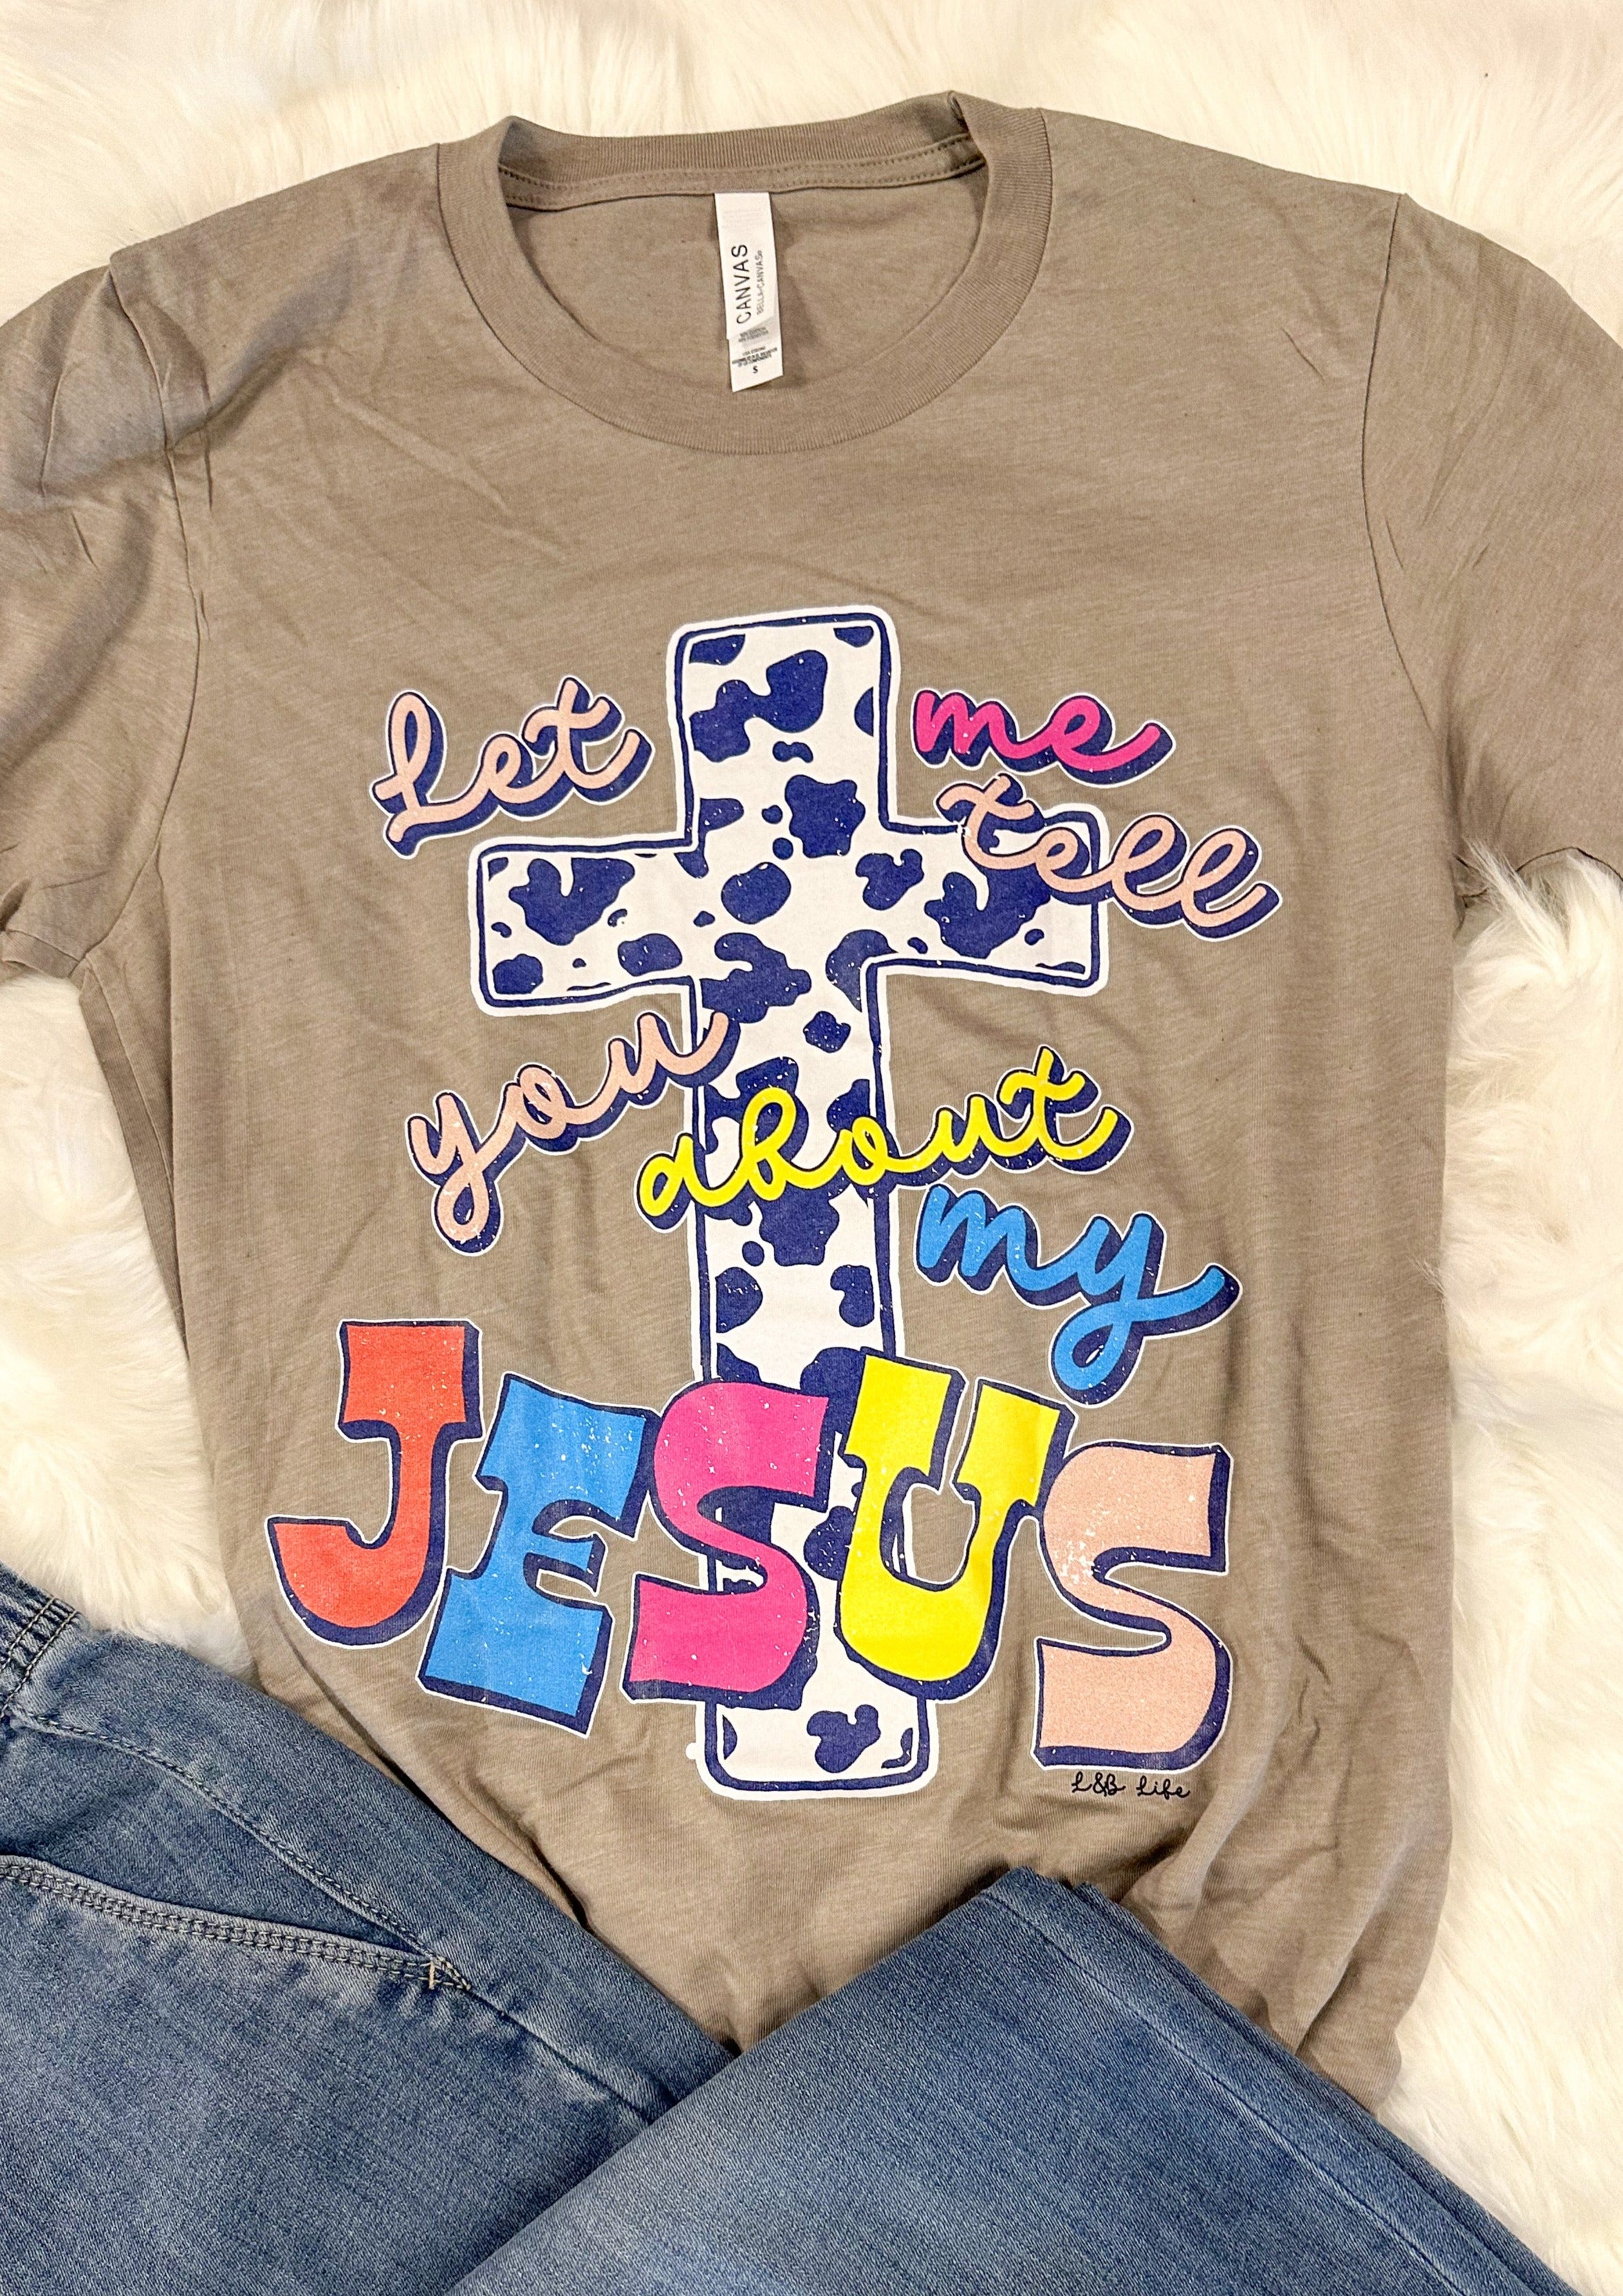 Let Me Tell You About My Jesus Tee Shirt - Stone color shirt with cow bring cross and multi colored writing - short sleeve